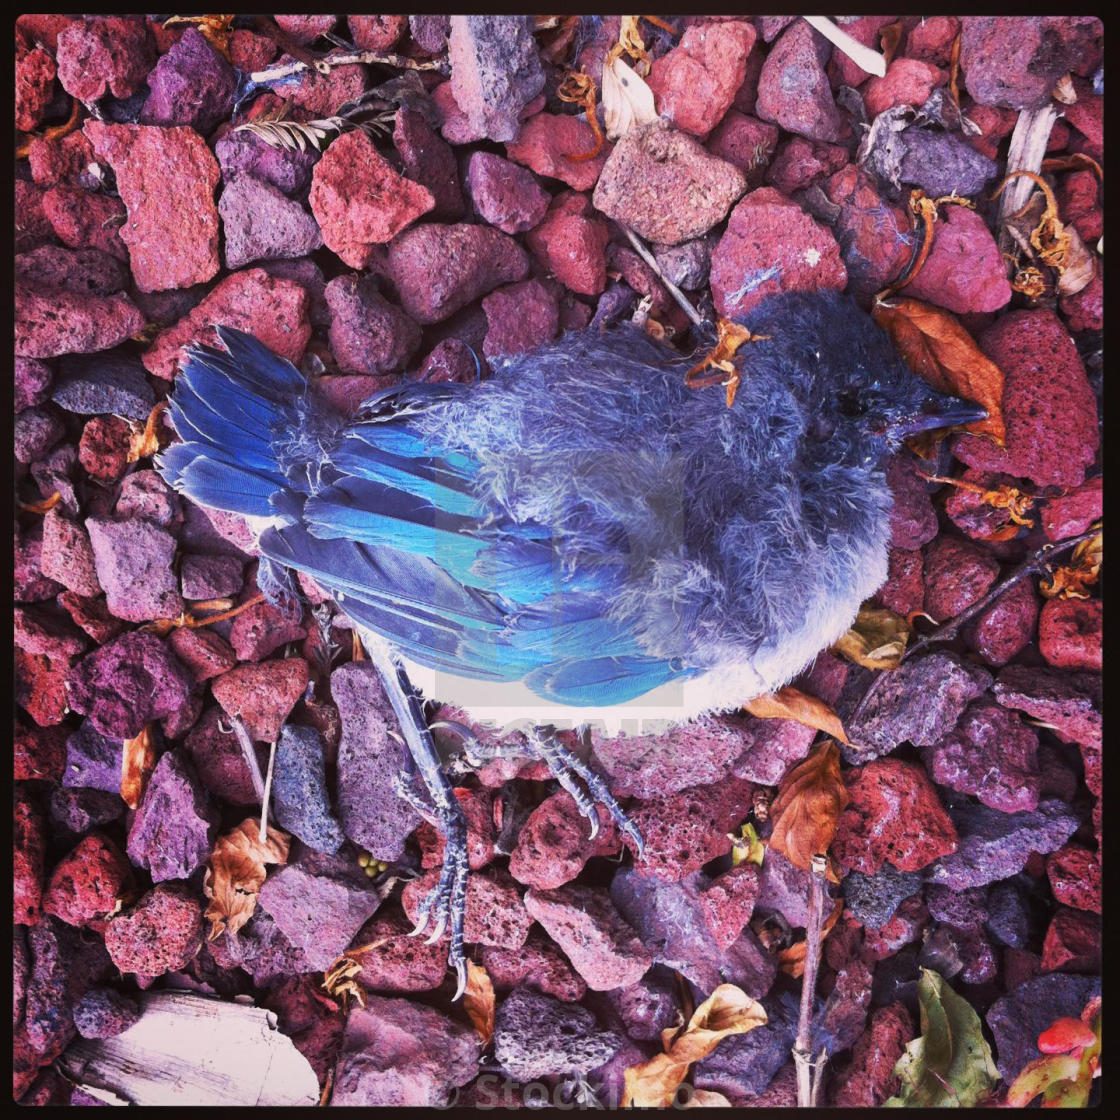 Baby Blue Jay Death From Feline Attack North America License Download Or Print For 31 00 Photos Picfair